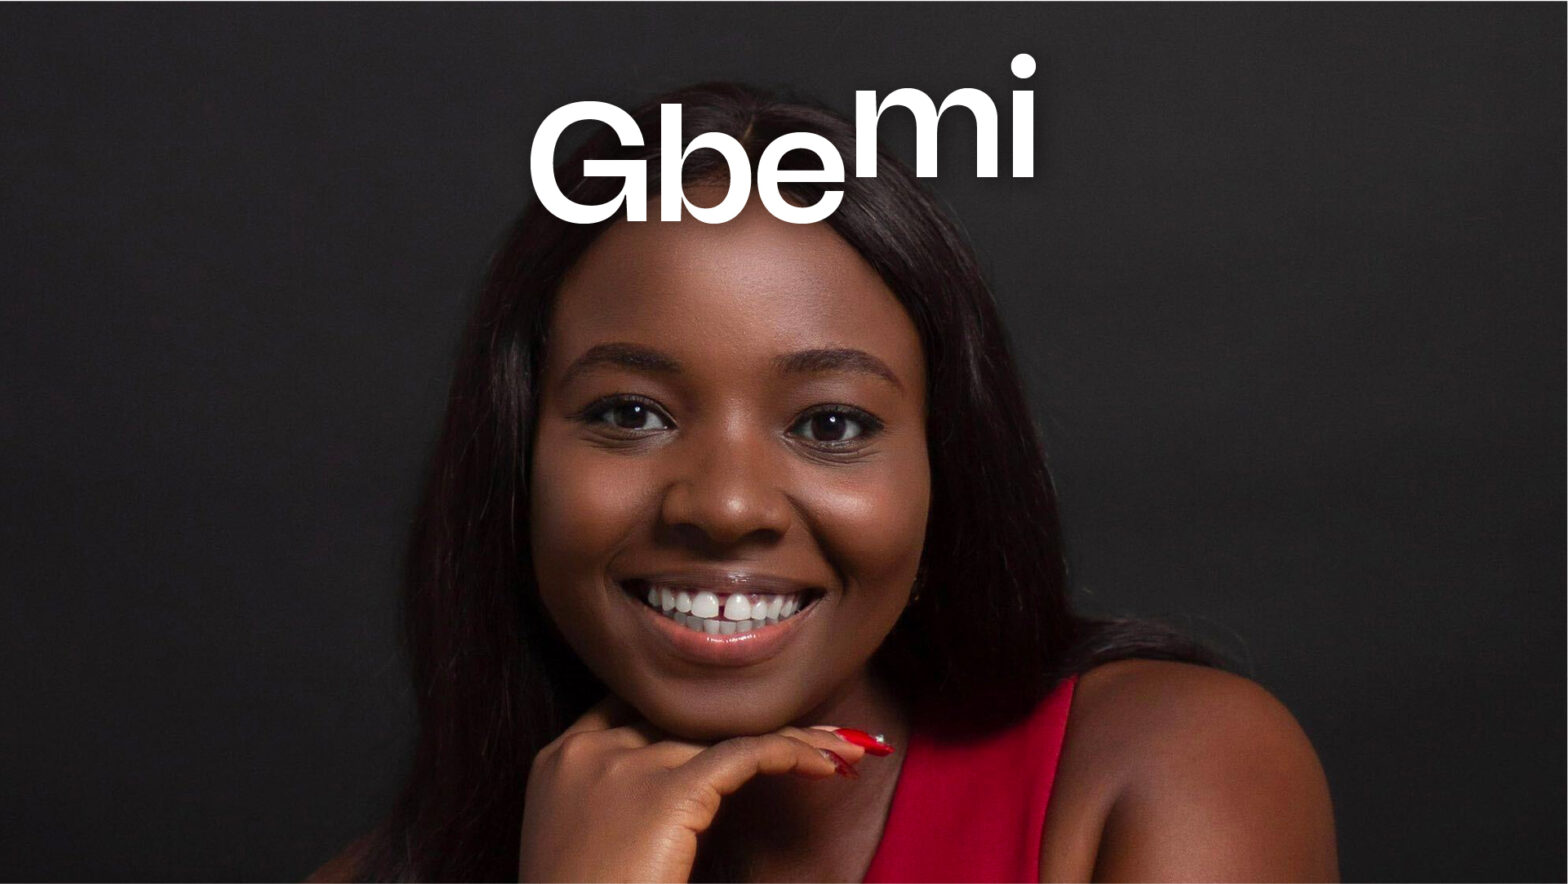 Risevest user story, Gbemi shares her story